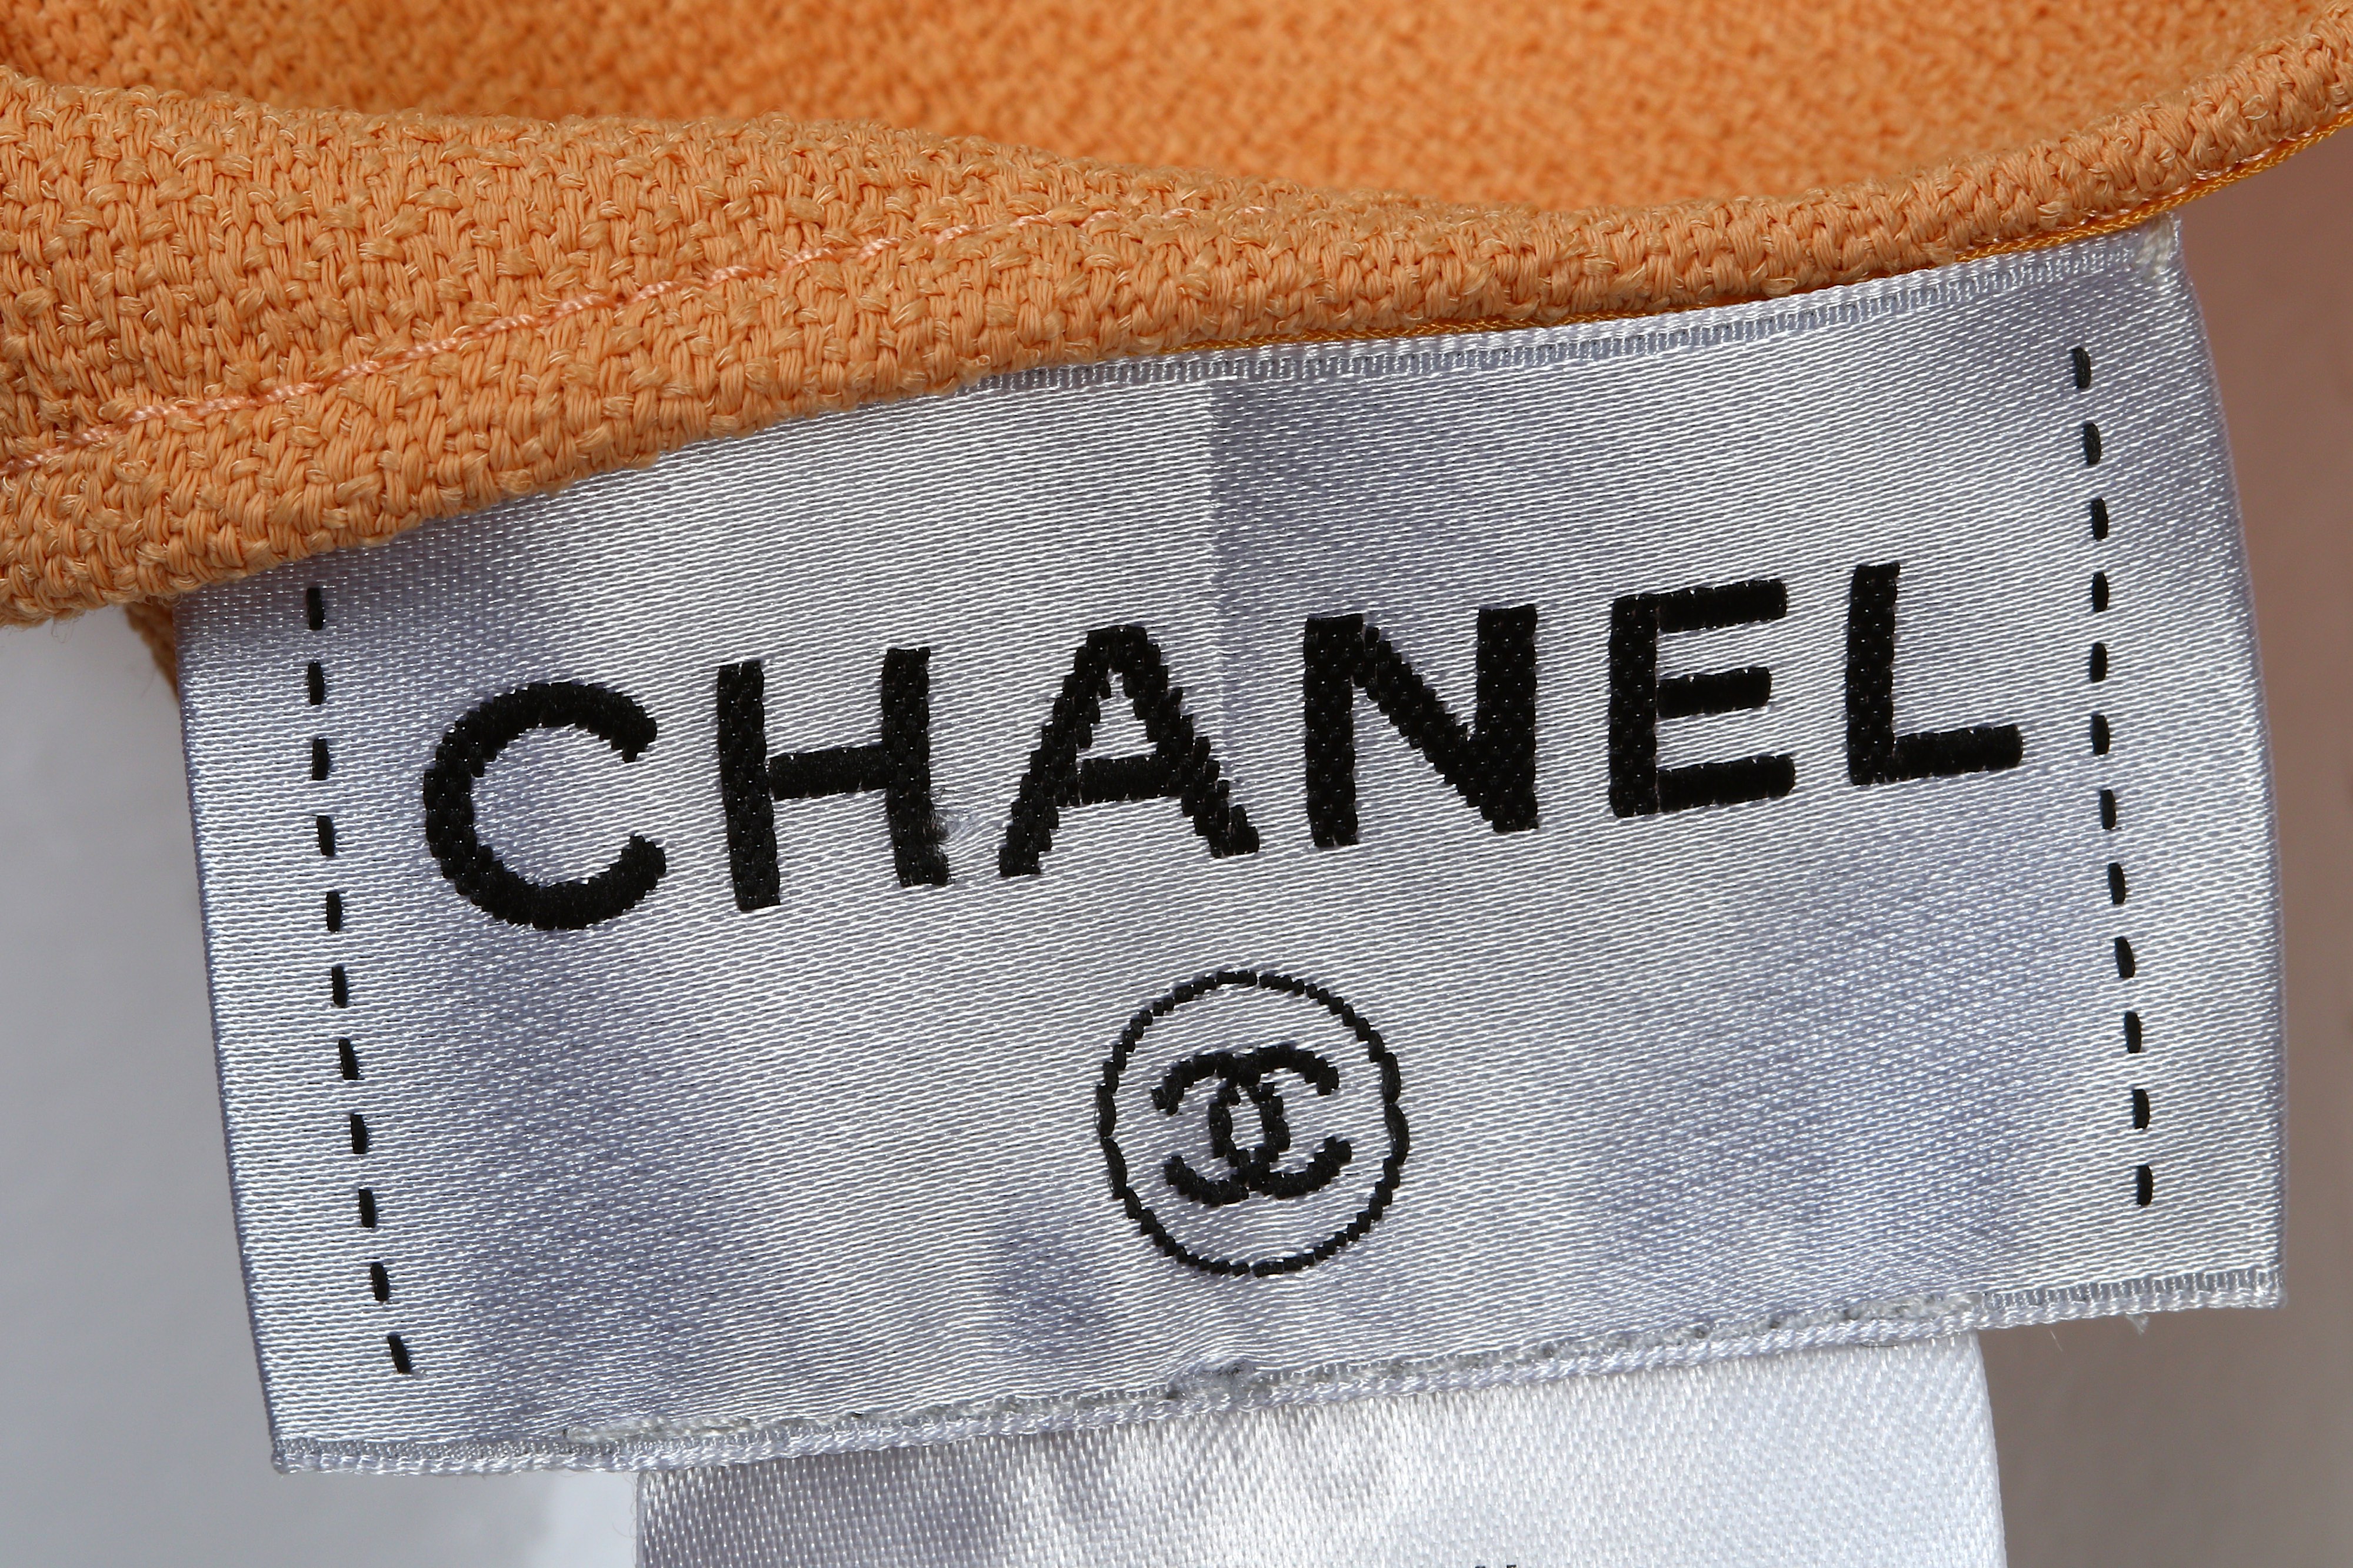 Chanel Orange and Pink Crepe Top/Dress - Image 5 of 5